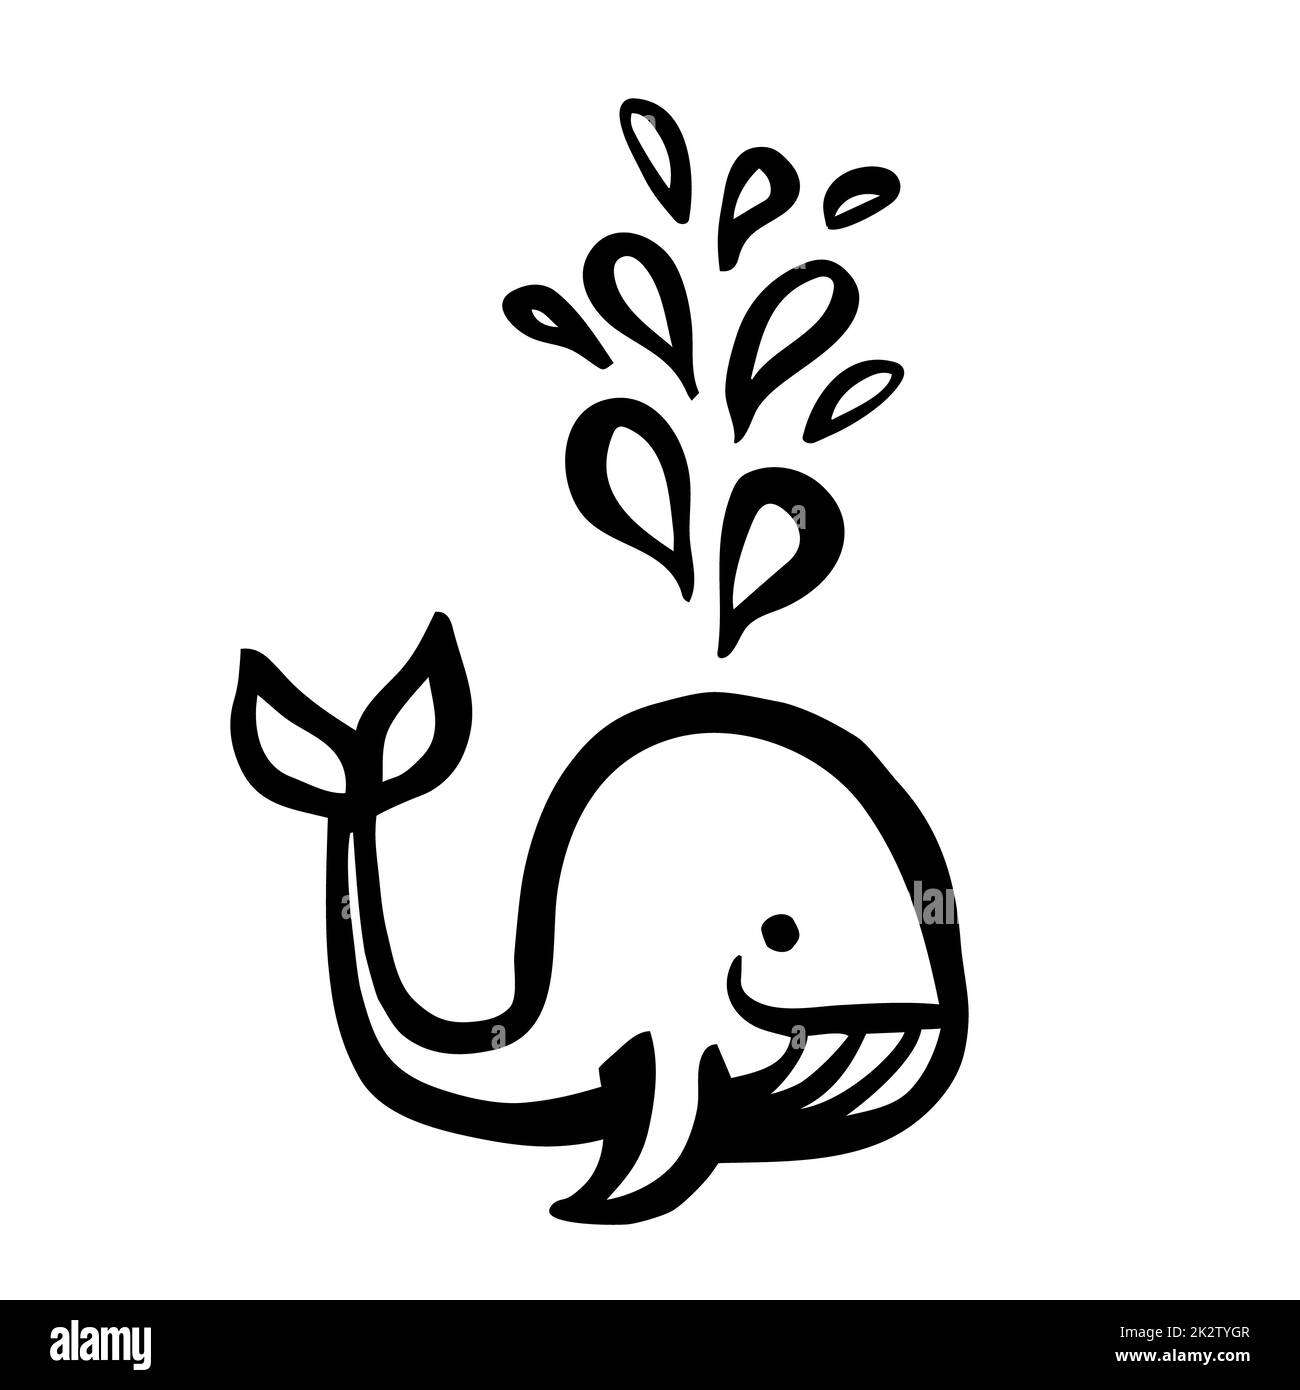 Cute cartoon whale hand painted with ink brush stroke Stock Photo